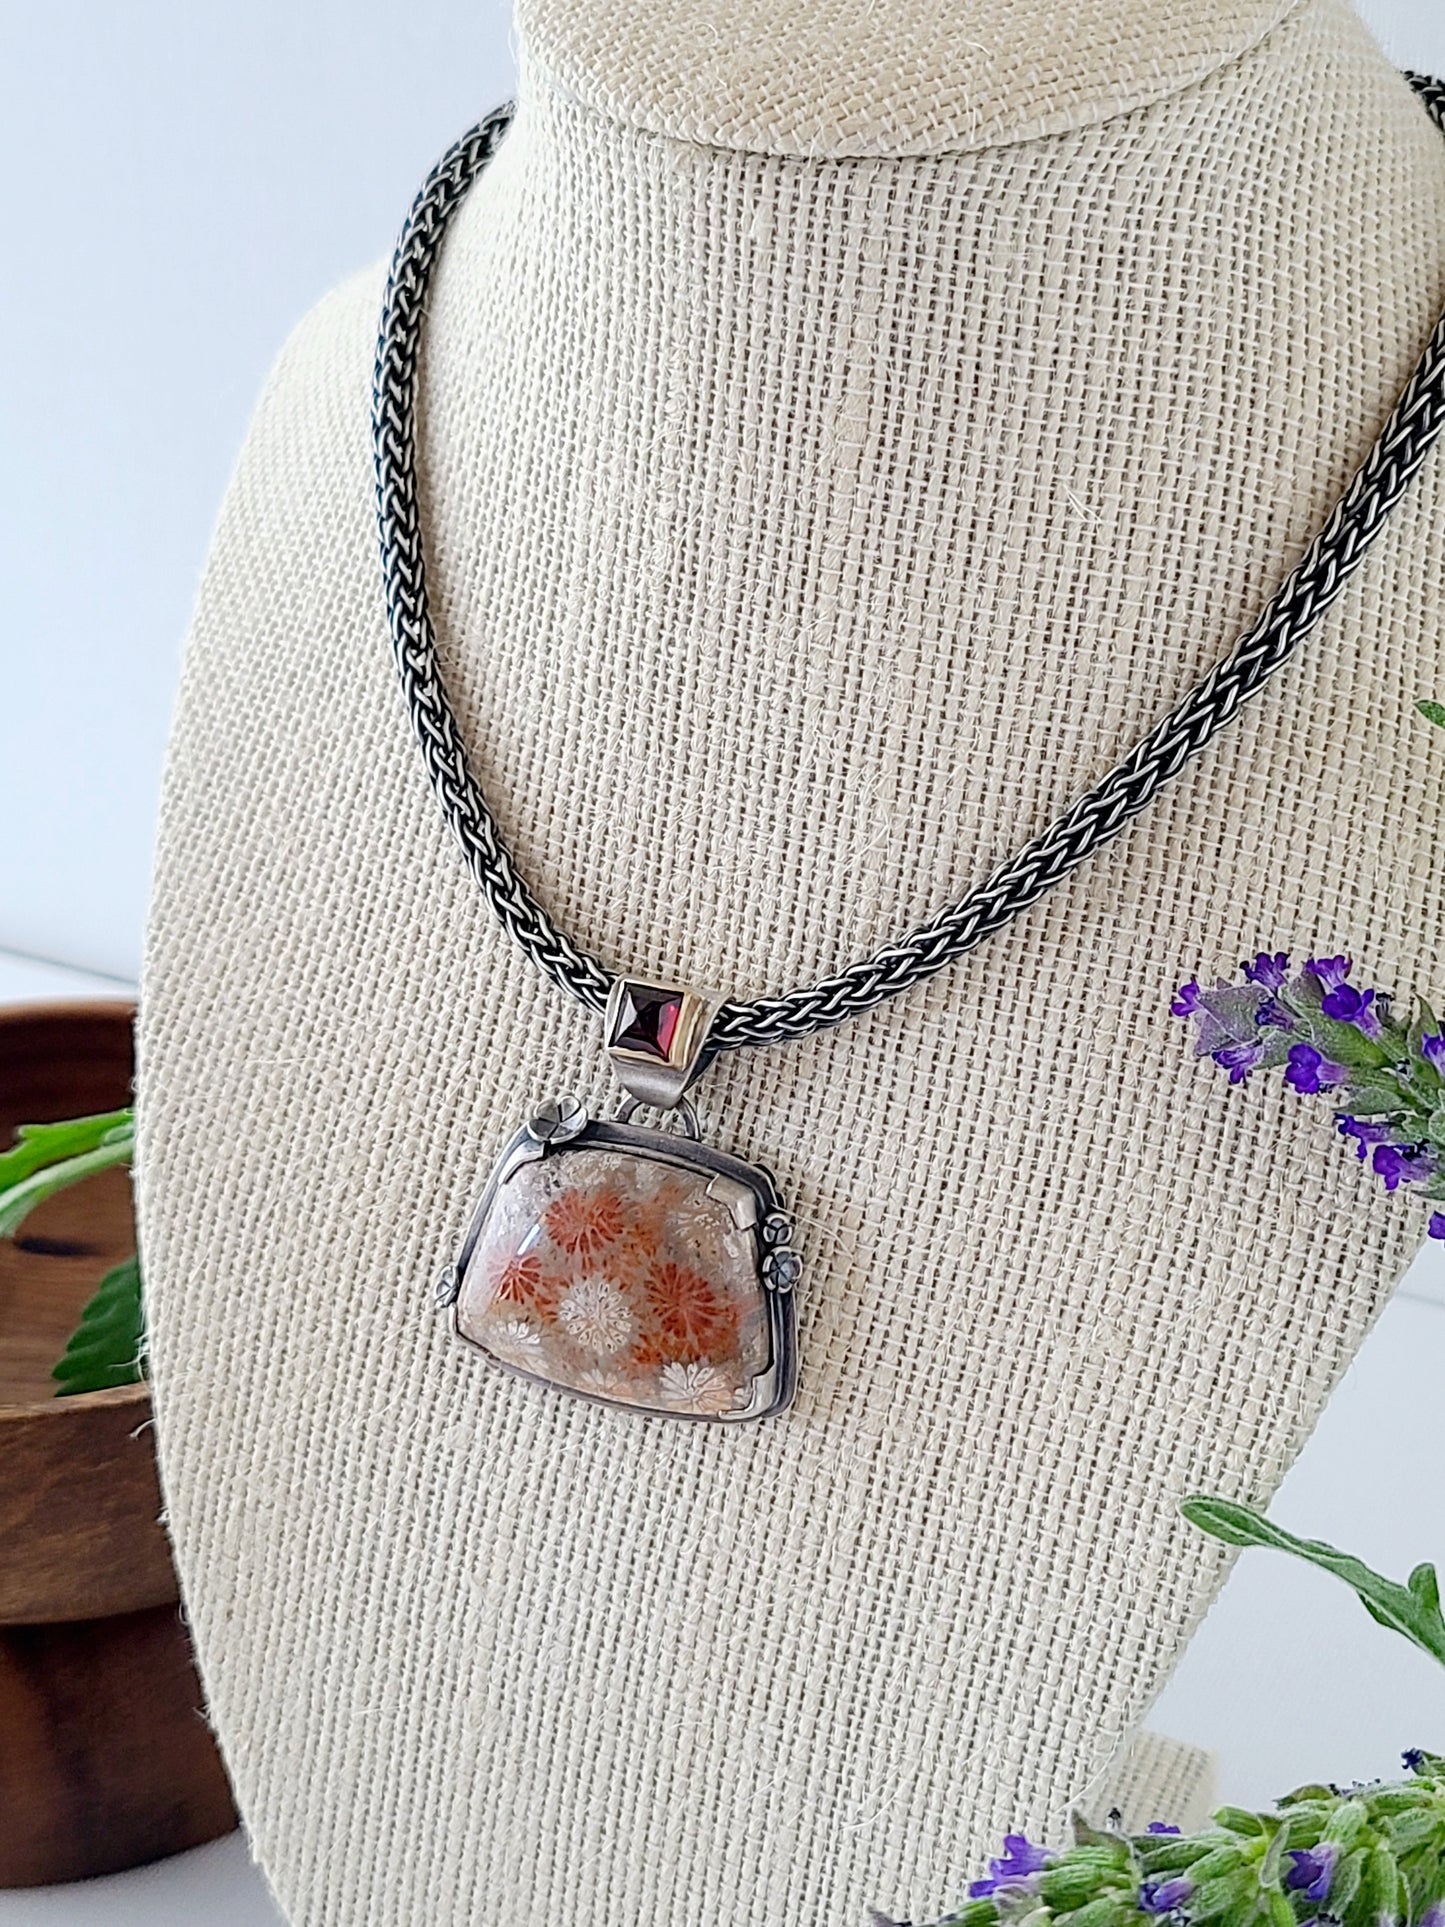 Wild Flower Necklace with Fossil Coral and Garnet-SS/14k